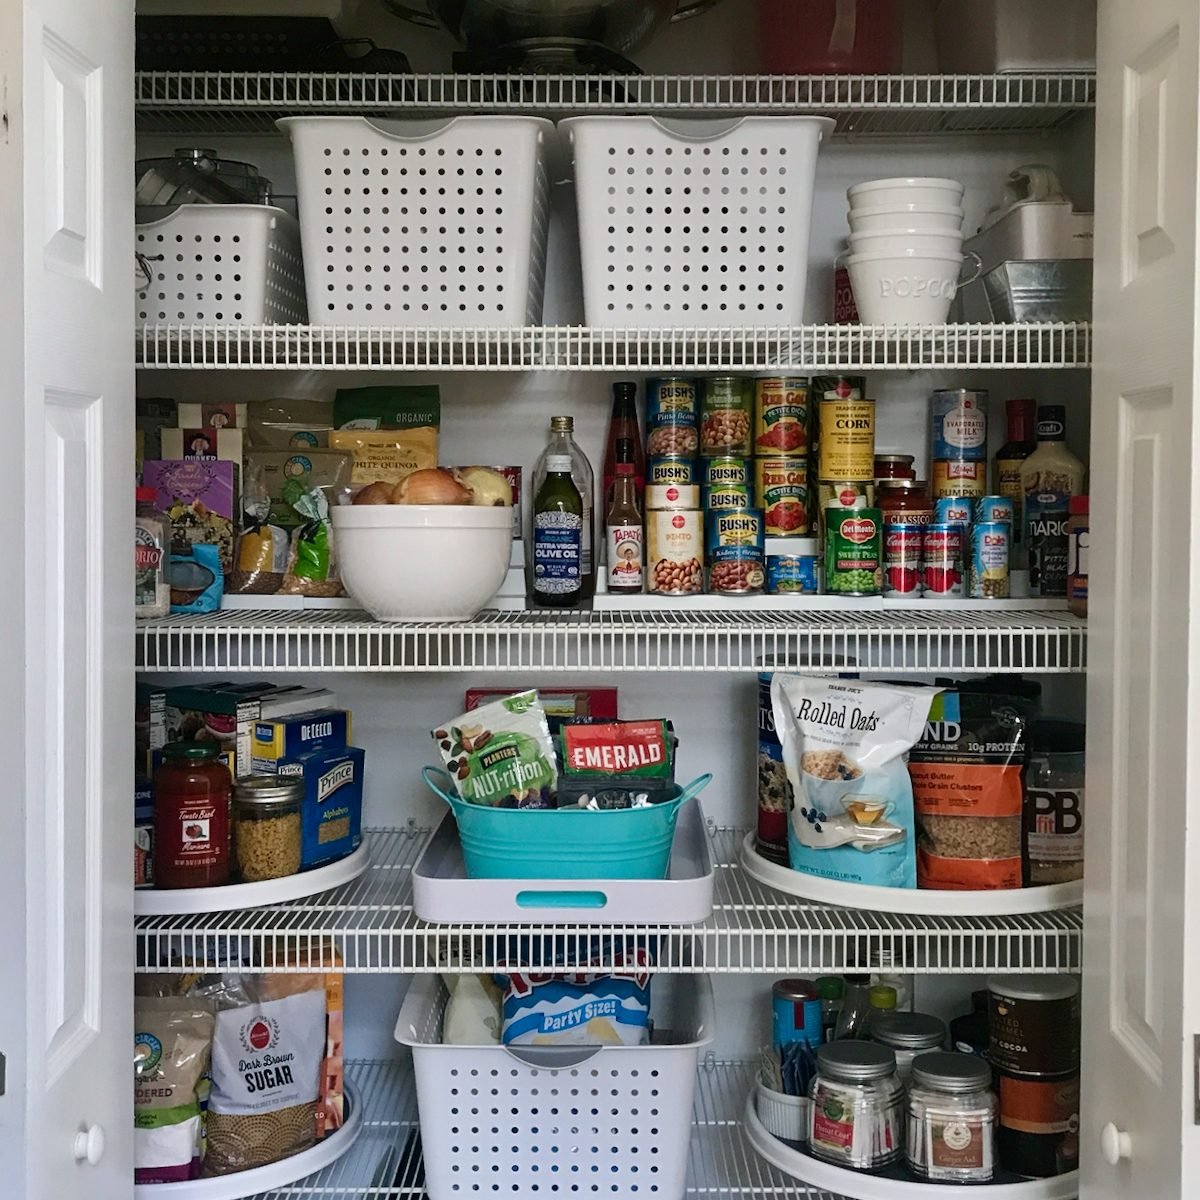 These Snack Organization Ideas Will Take Your Pantry from Mess to